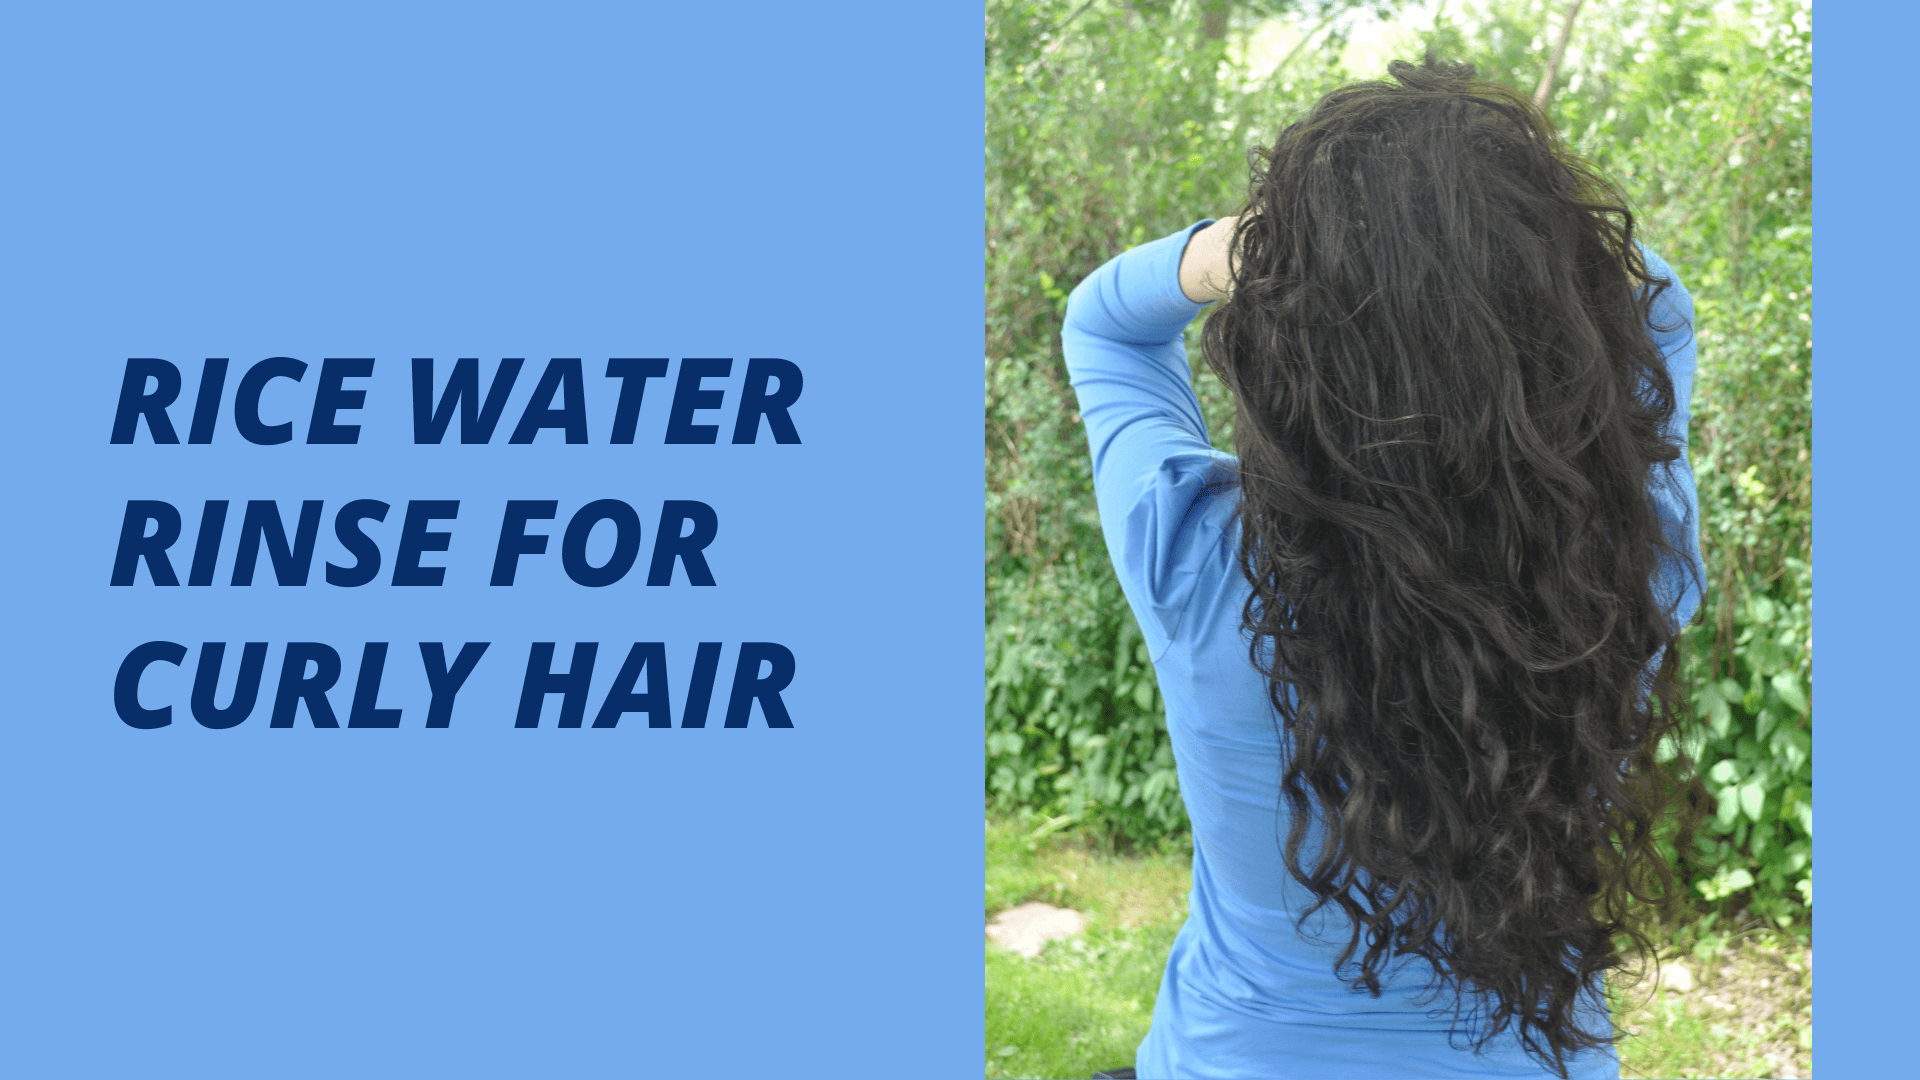 My Super-Simple Rice Water Rinse for Curly Hair + Results - curly girl life